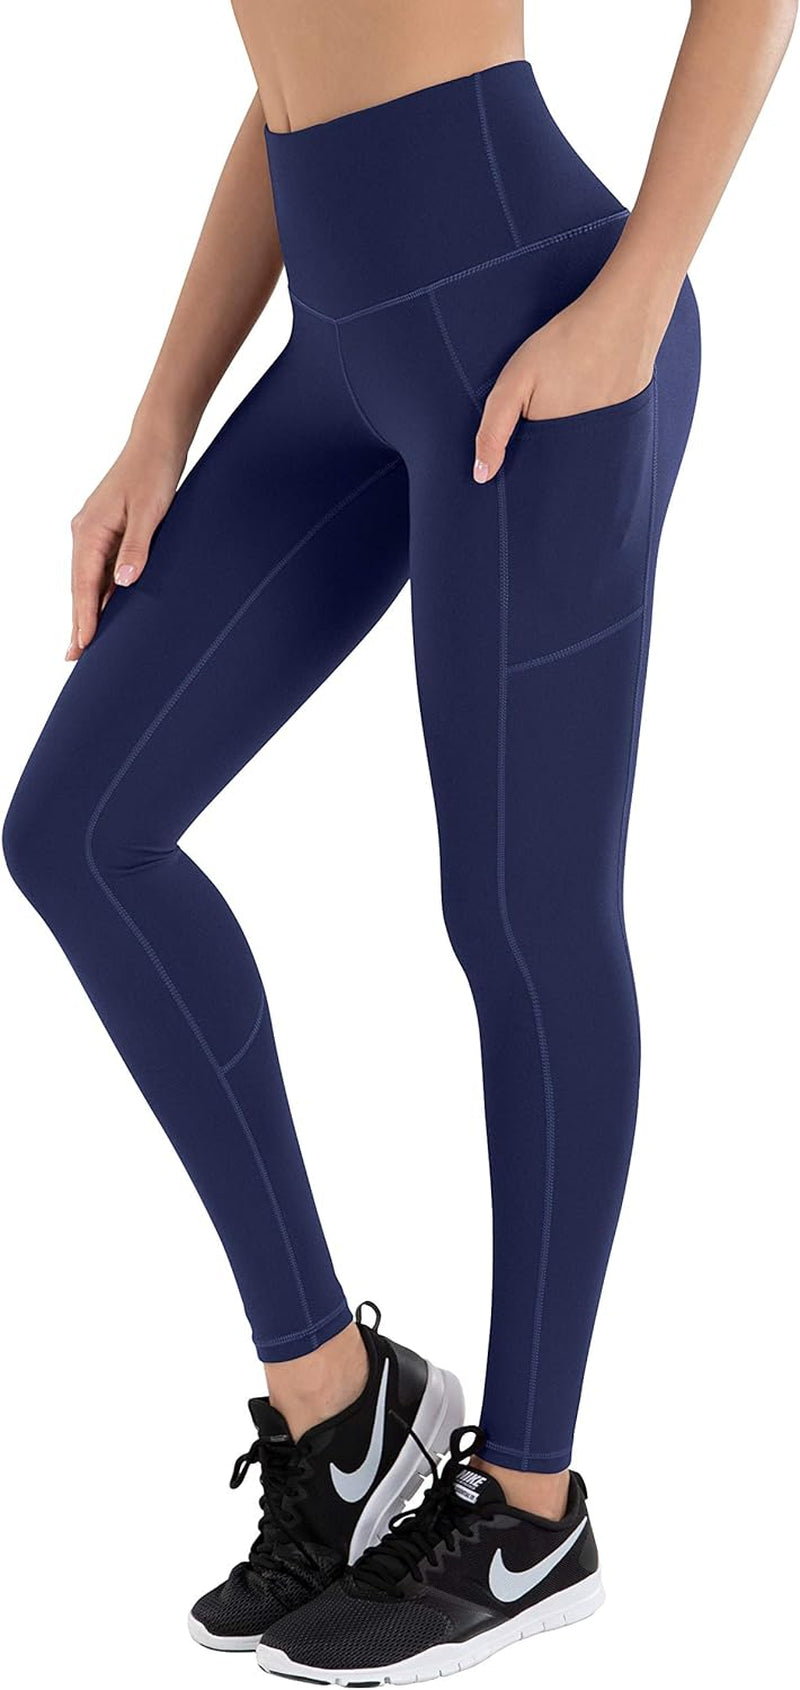 High Waisted Leggings with Pockets for Women: Lifesky Women'S Spandex 4-Way Stretch Workout Yoga Pants - Tummy Control Buttery Soft Athletic Workout Butt Leggings